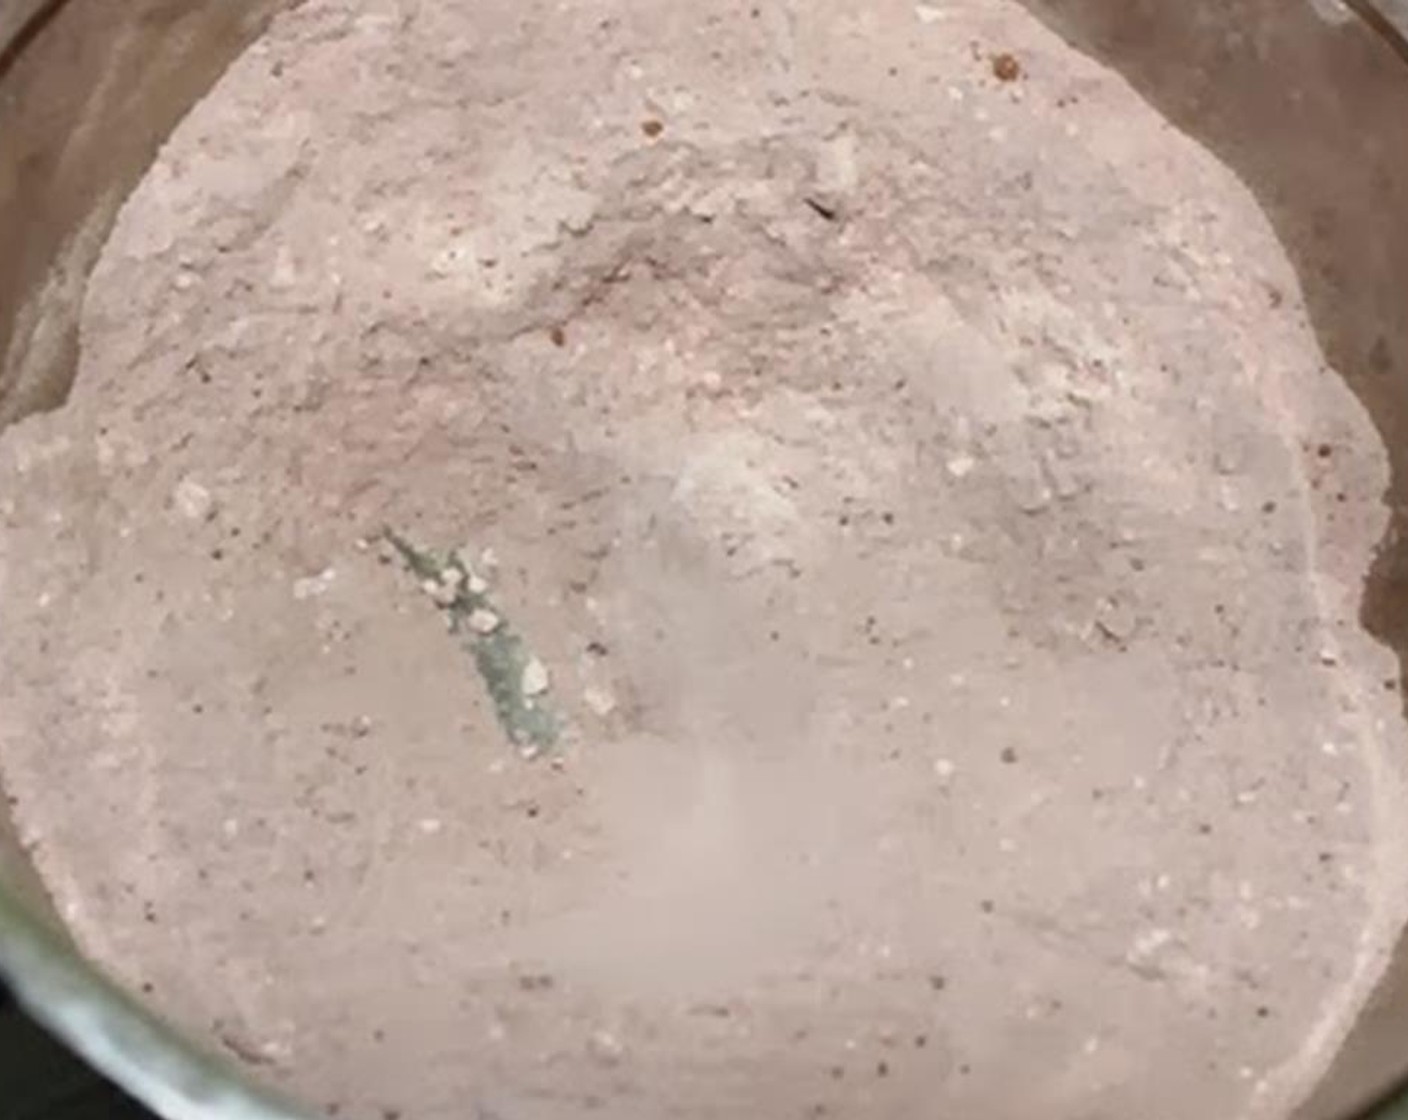 step 2 Mix together All-Purpose Flour (1 1/4 cups), Unsweetened Cocoa Powder (1/4 cup), Baking Powder (1/2 tsp), Baking Soda (1/2 tsp), Powdered Confectioners Sugar (2/3 cup), Salt (1 pinch), and Vanilla Extract (1/2 Tbsp).